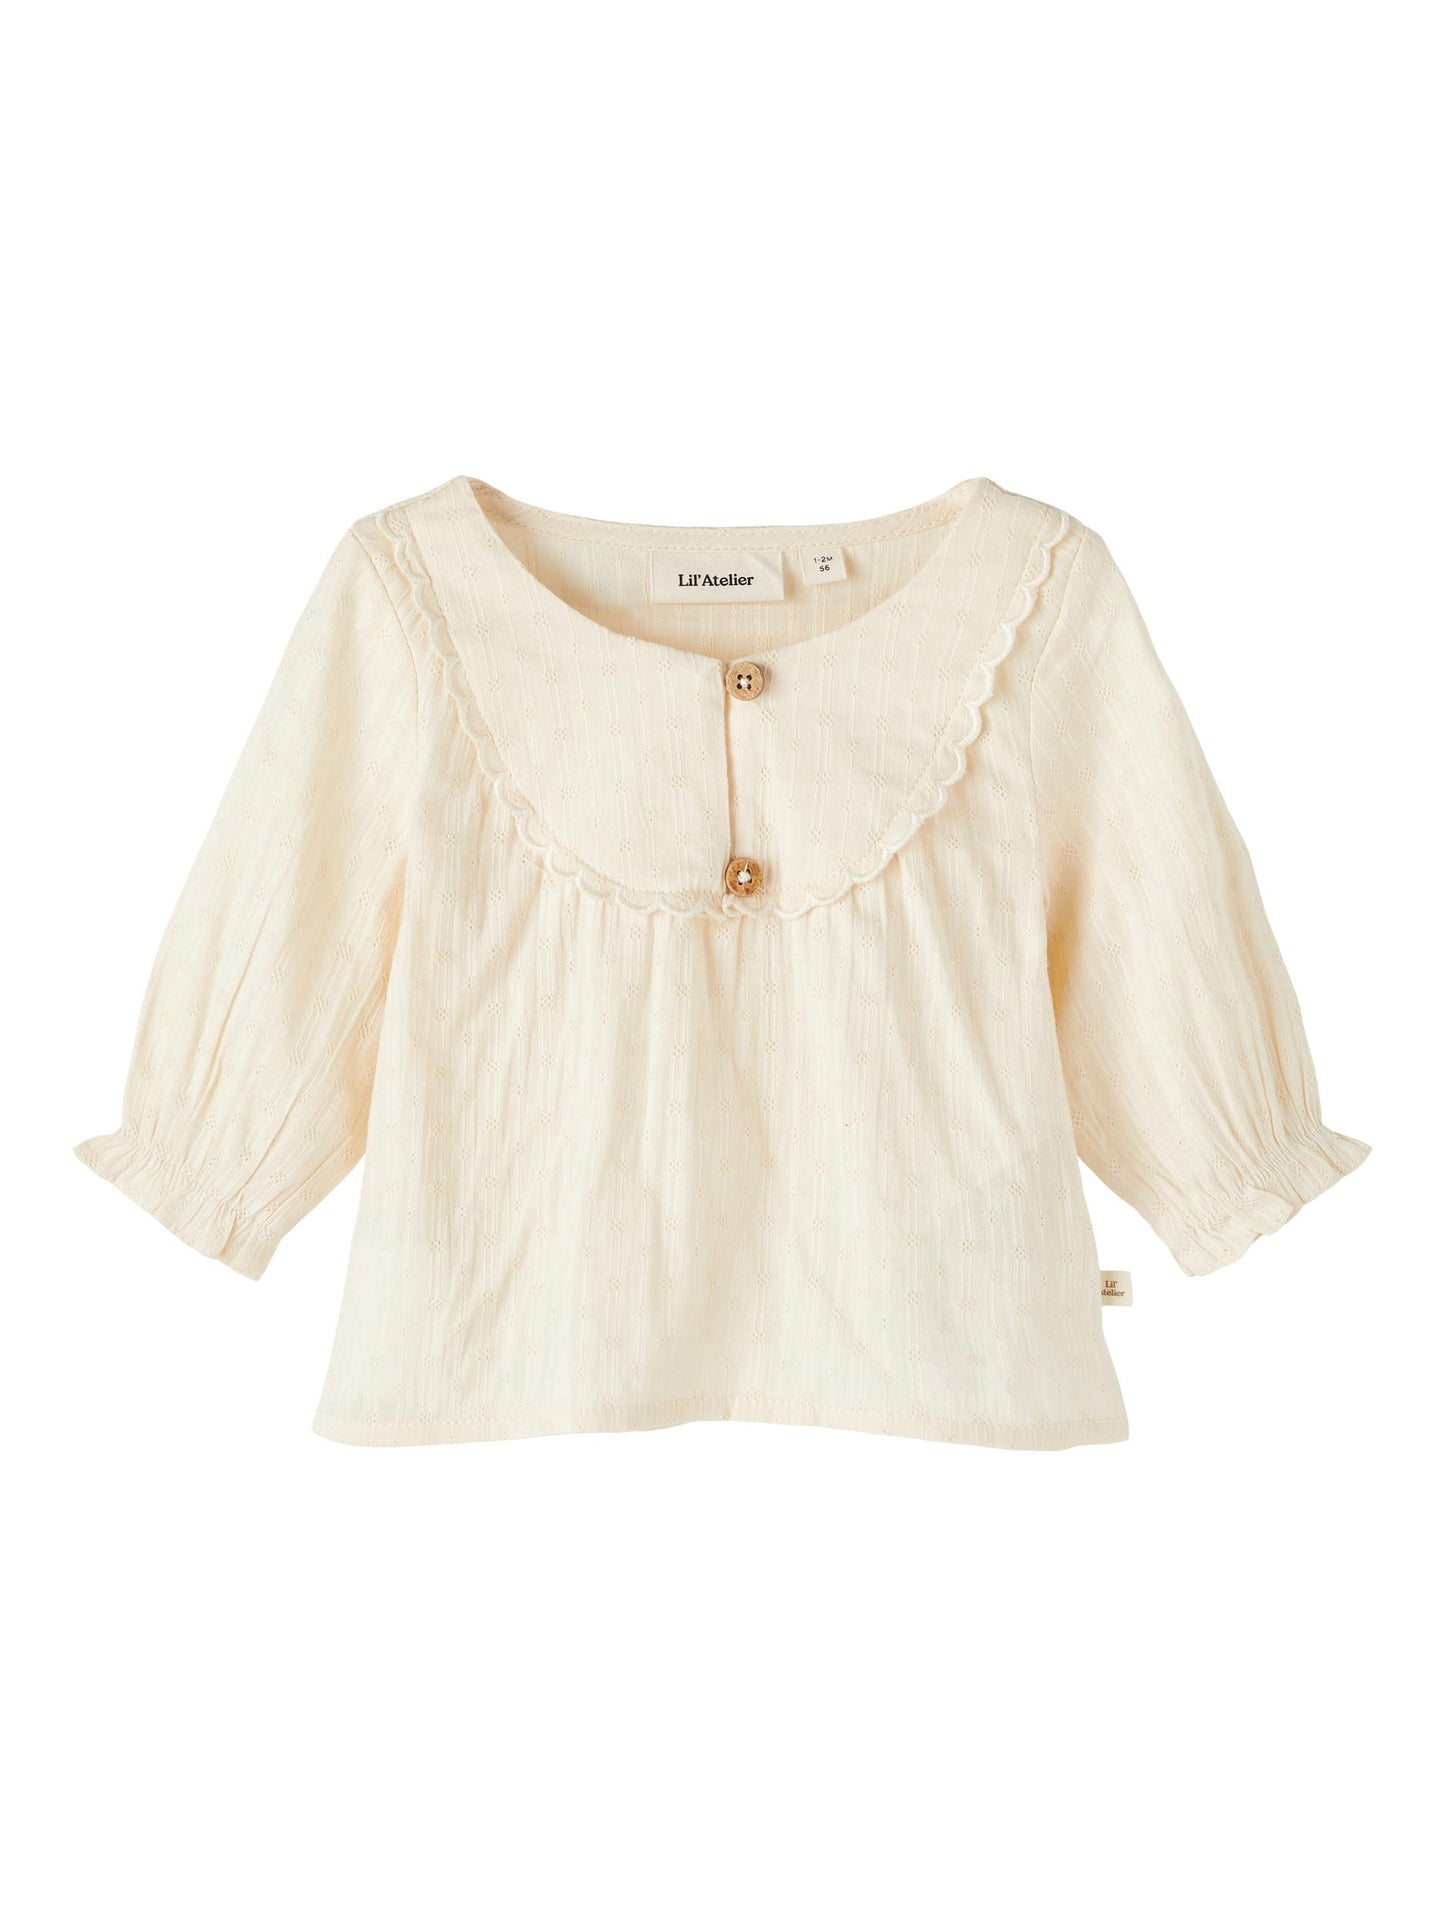 Lil atelier blouse off-white